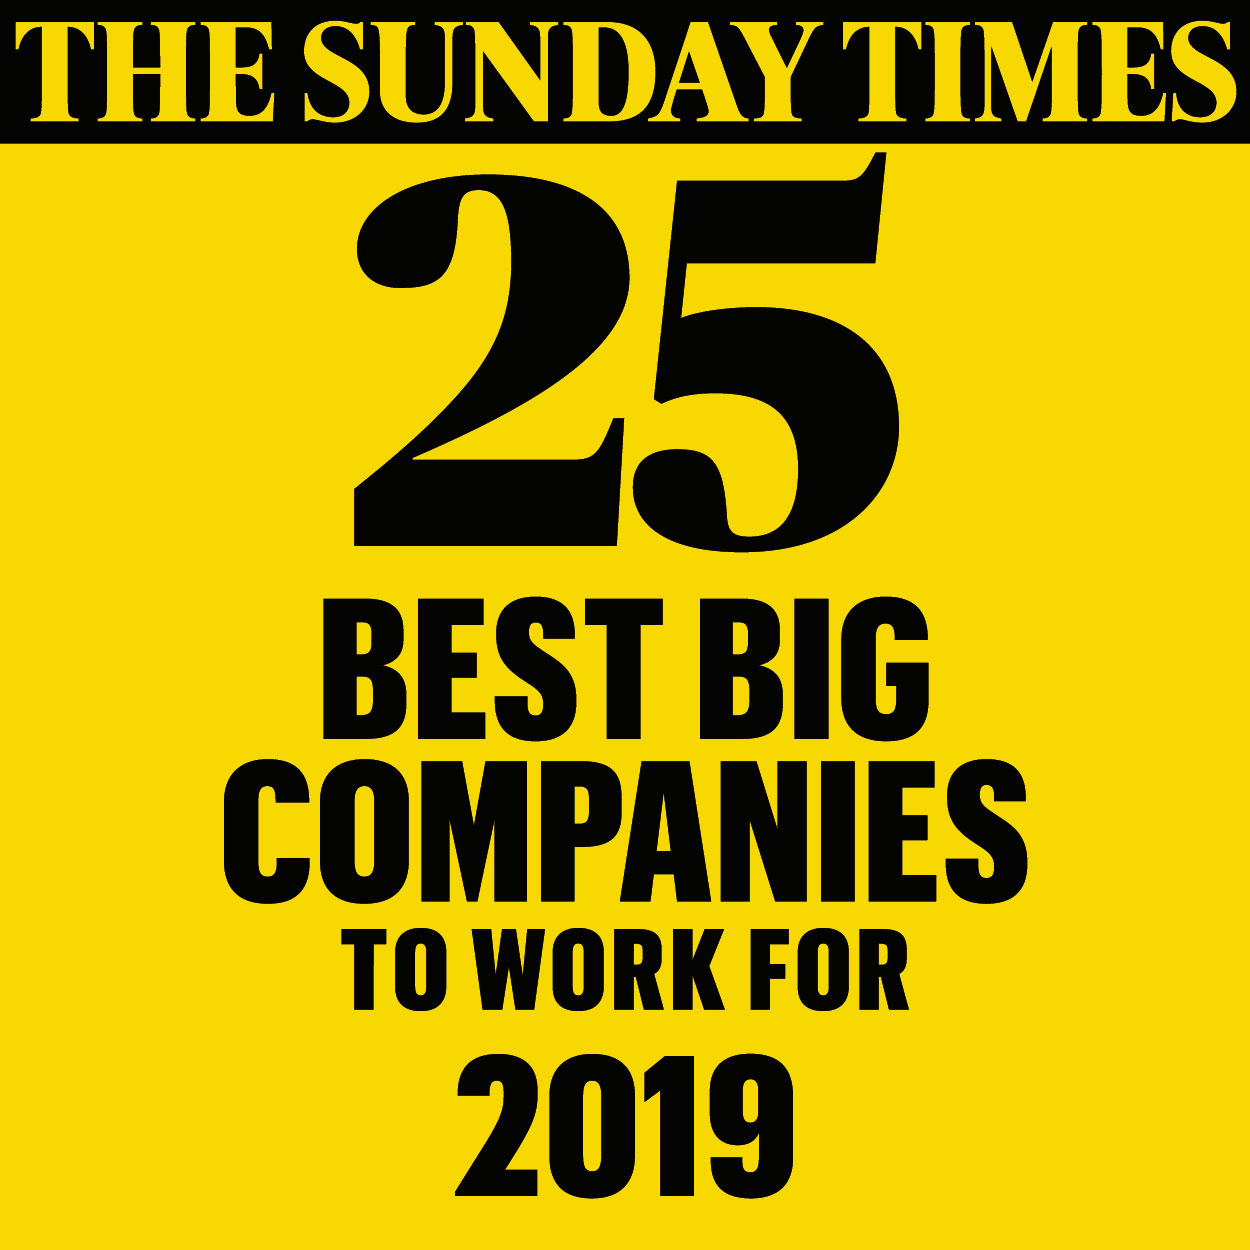 Sunday Times best big companies to work for 2019